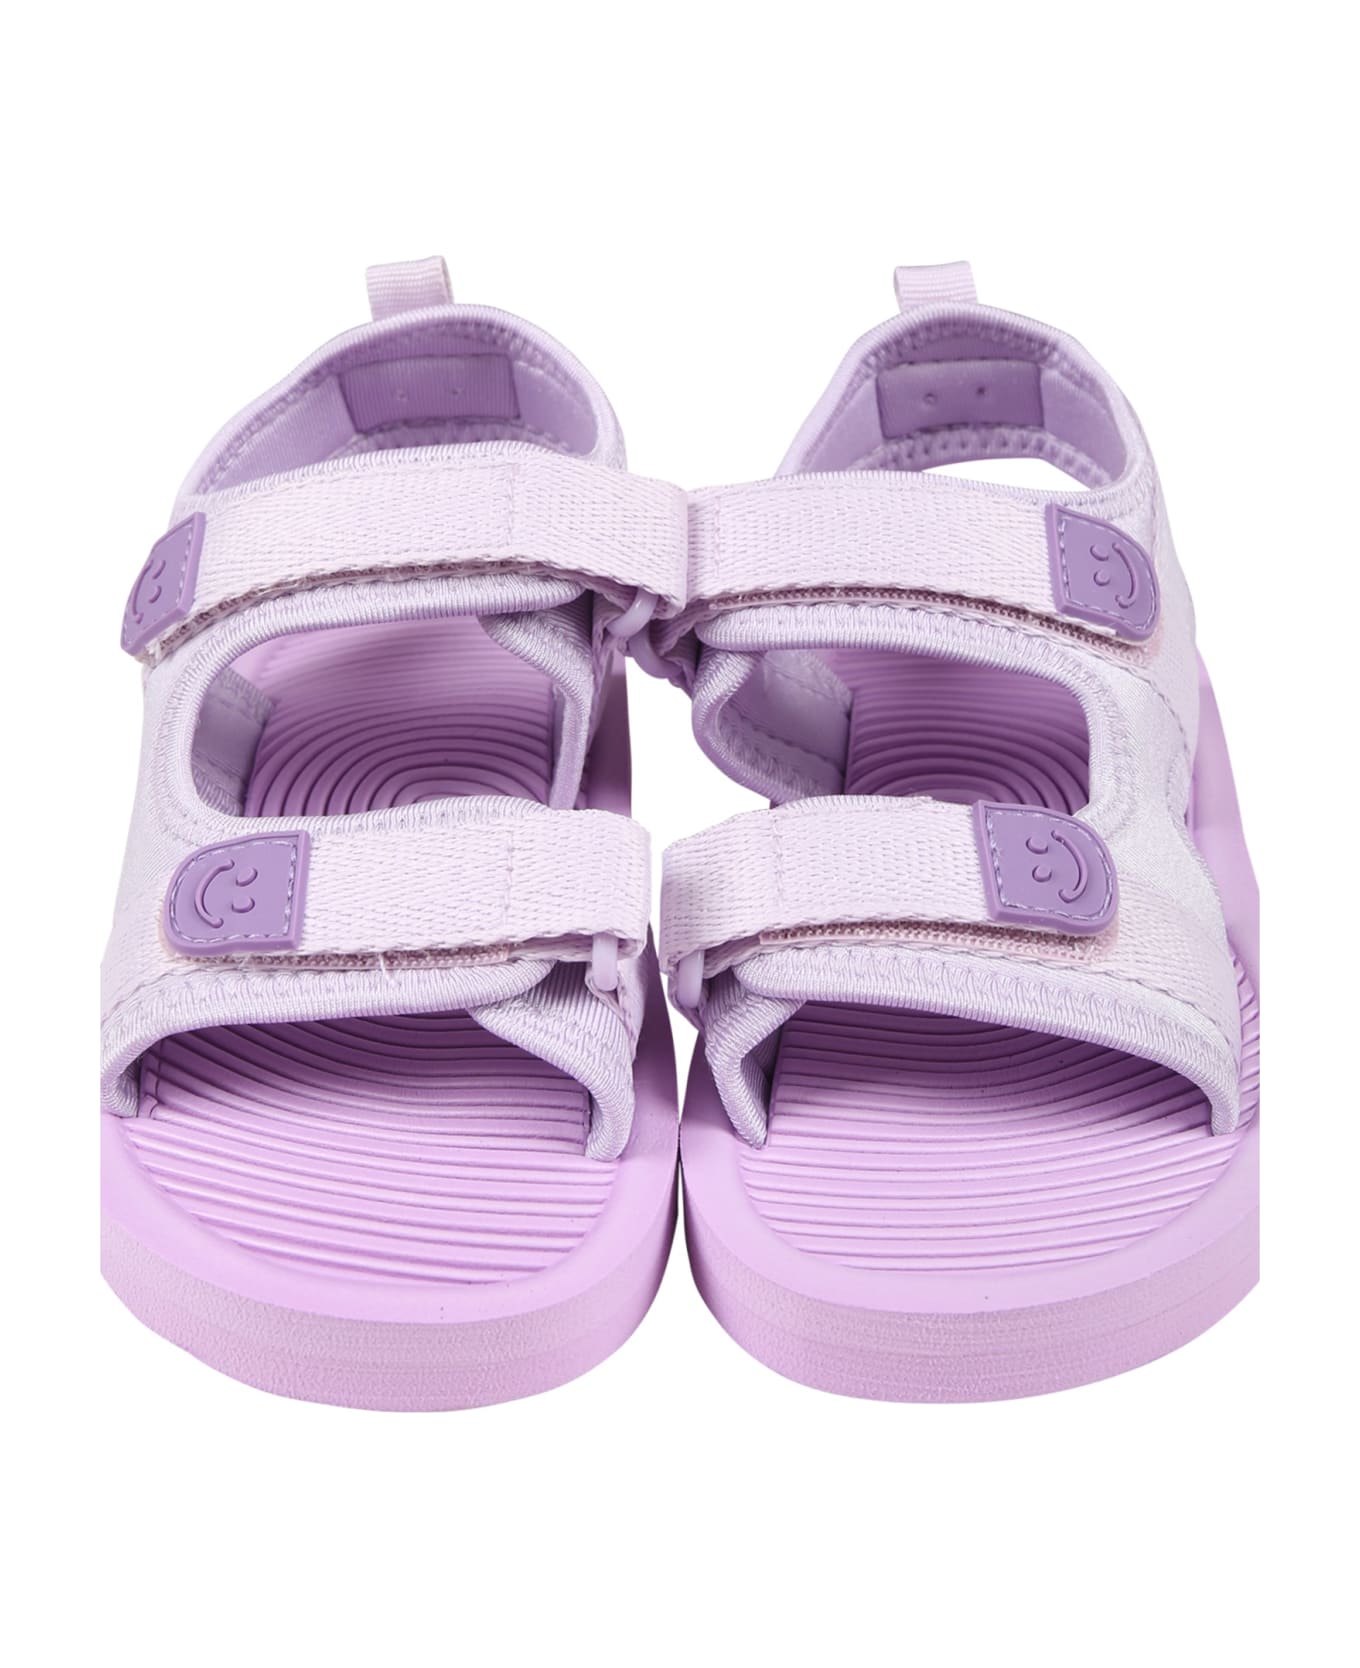 Molo Purple Sandals For Girl With Logo - Violet シューズ